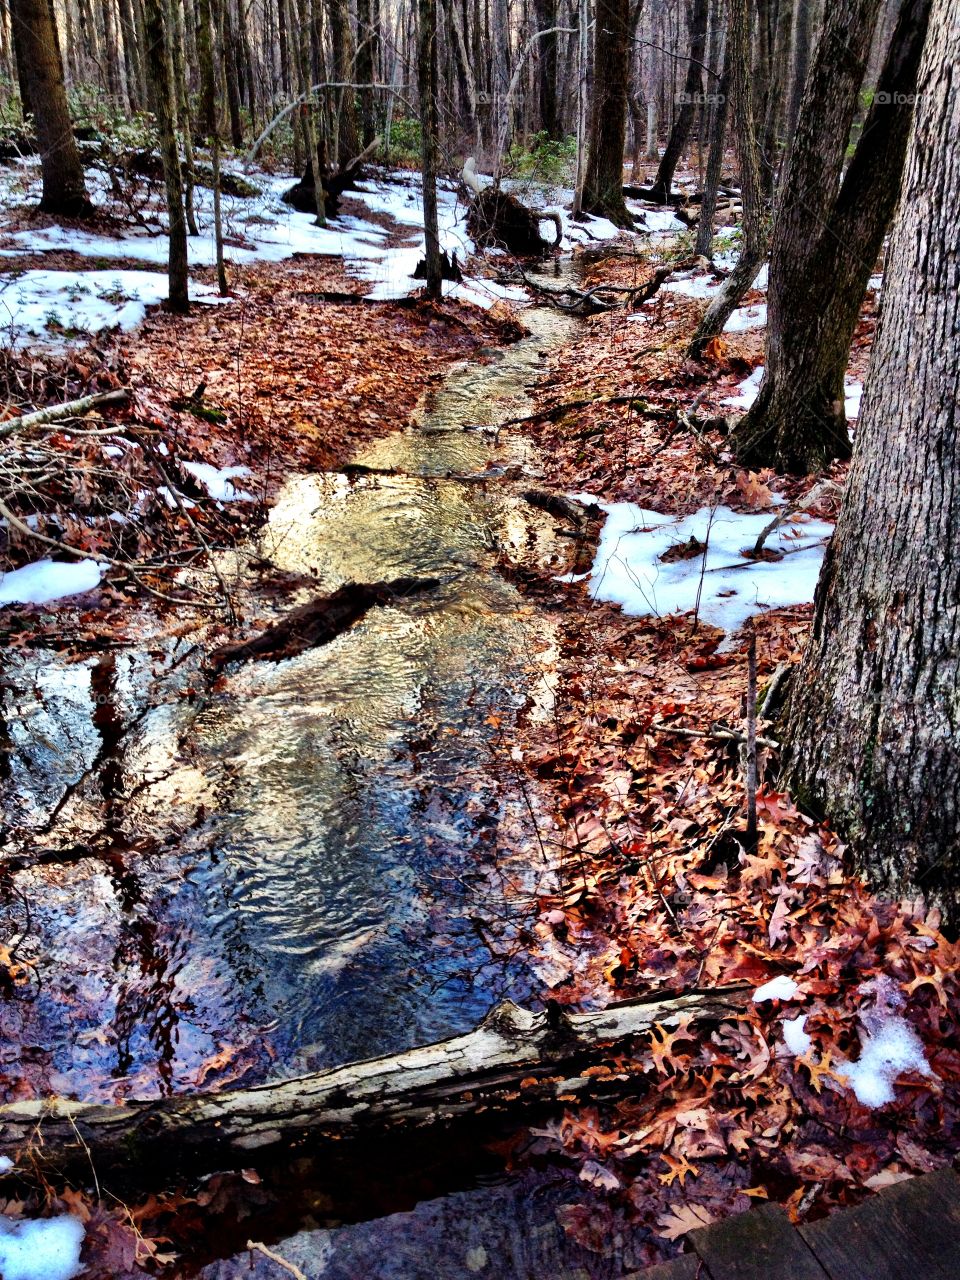 Winter Woods. Snow covered bank of a stream